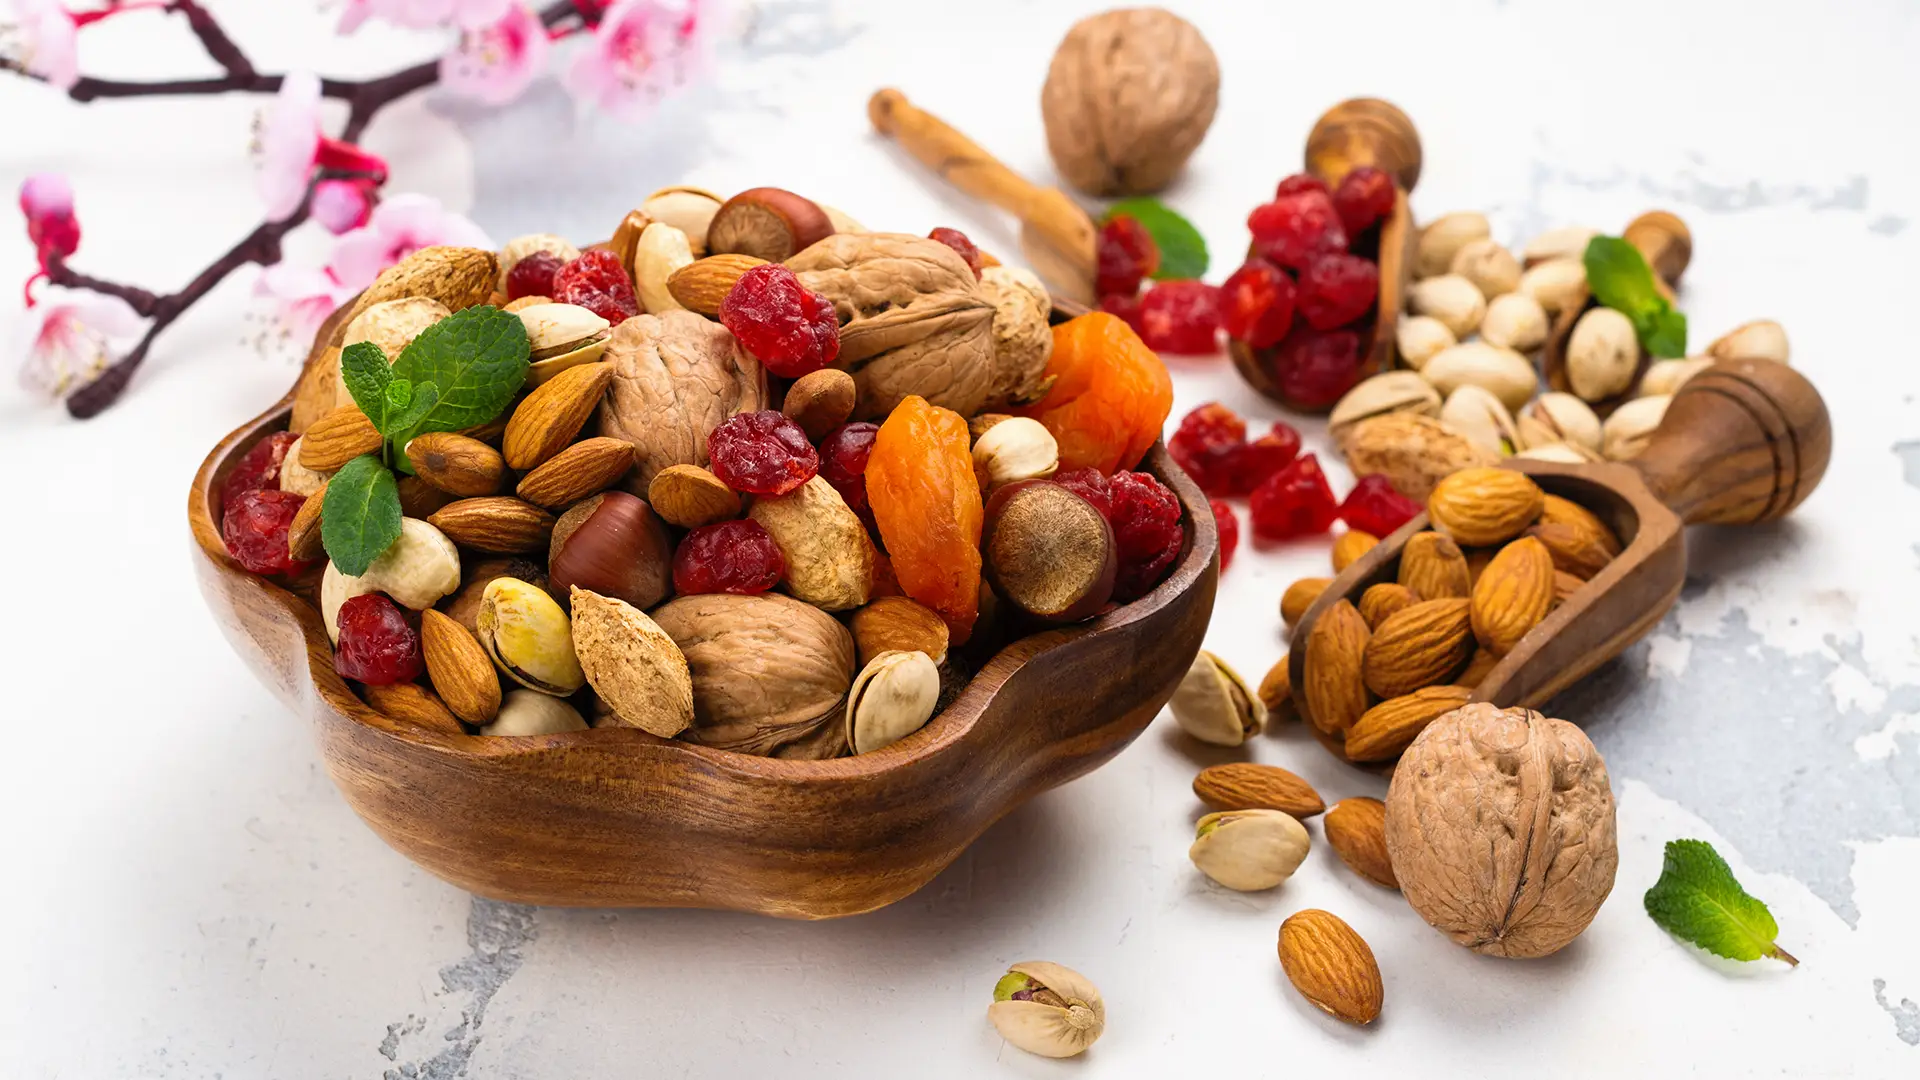 Make your Life More Healthier with Nuts and Dry Fruits